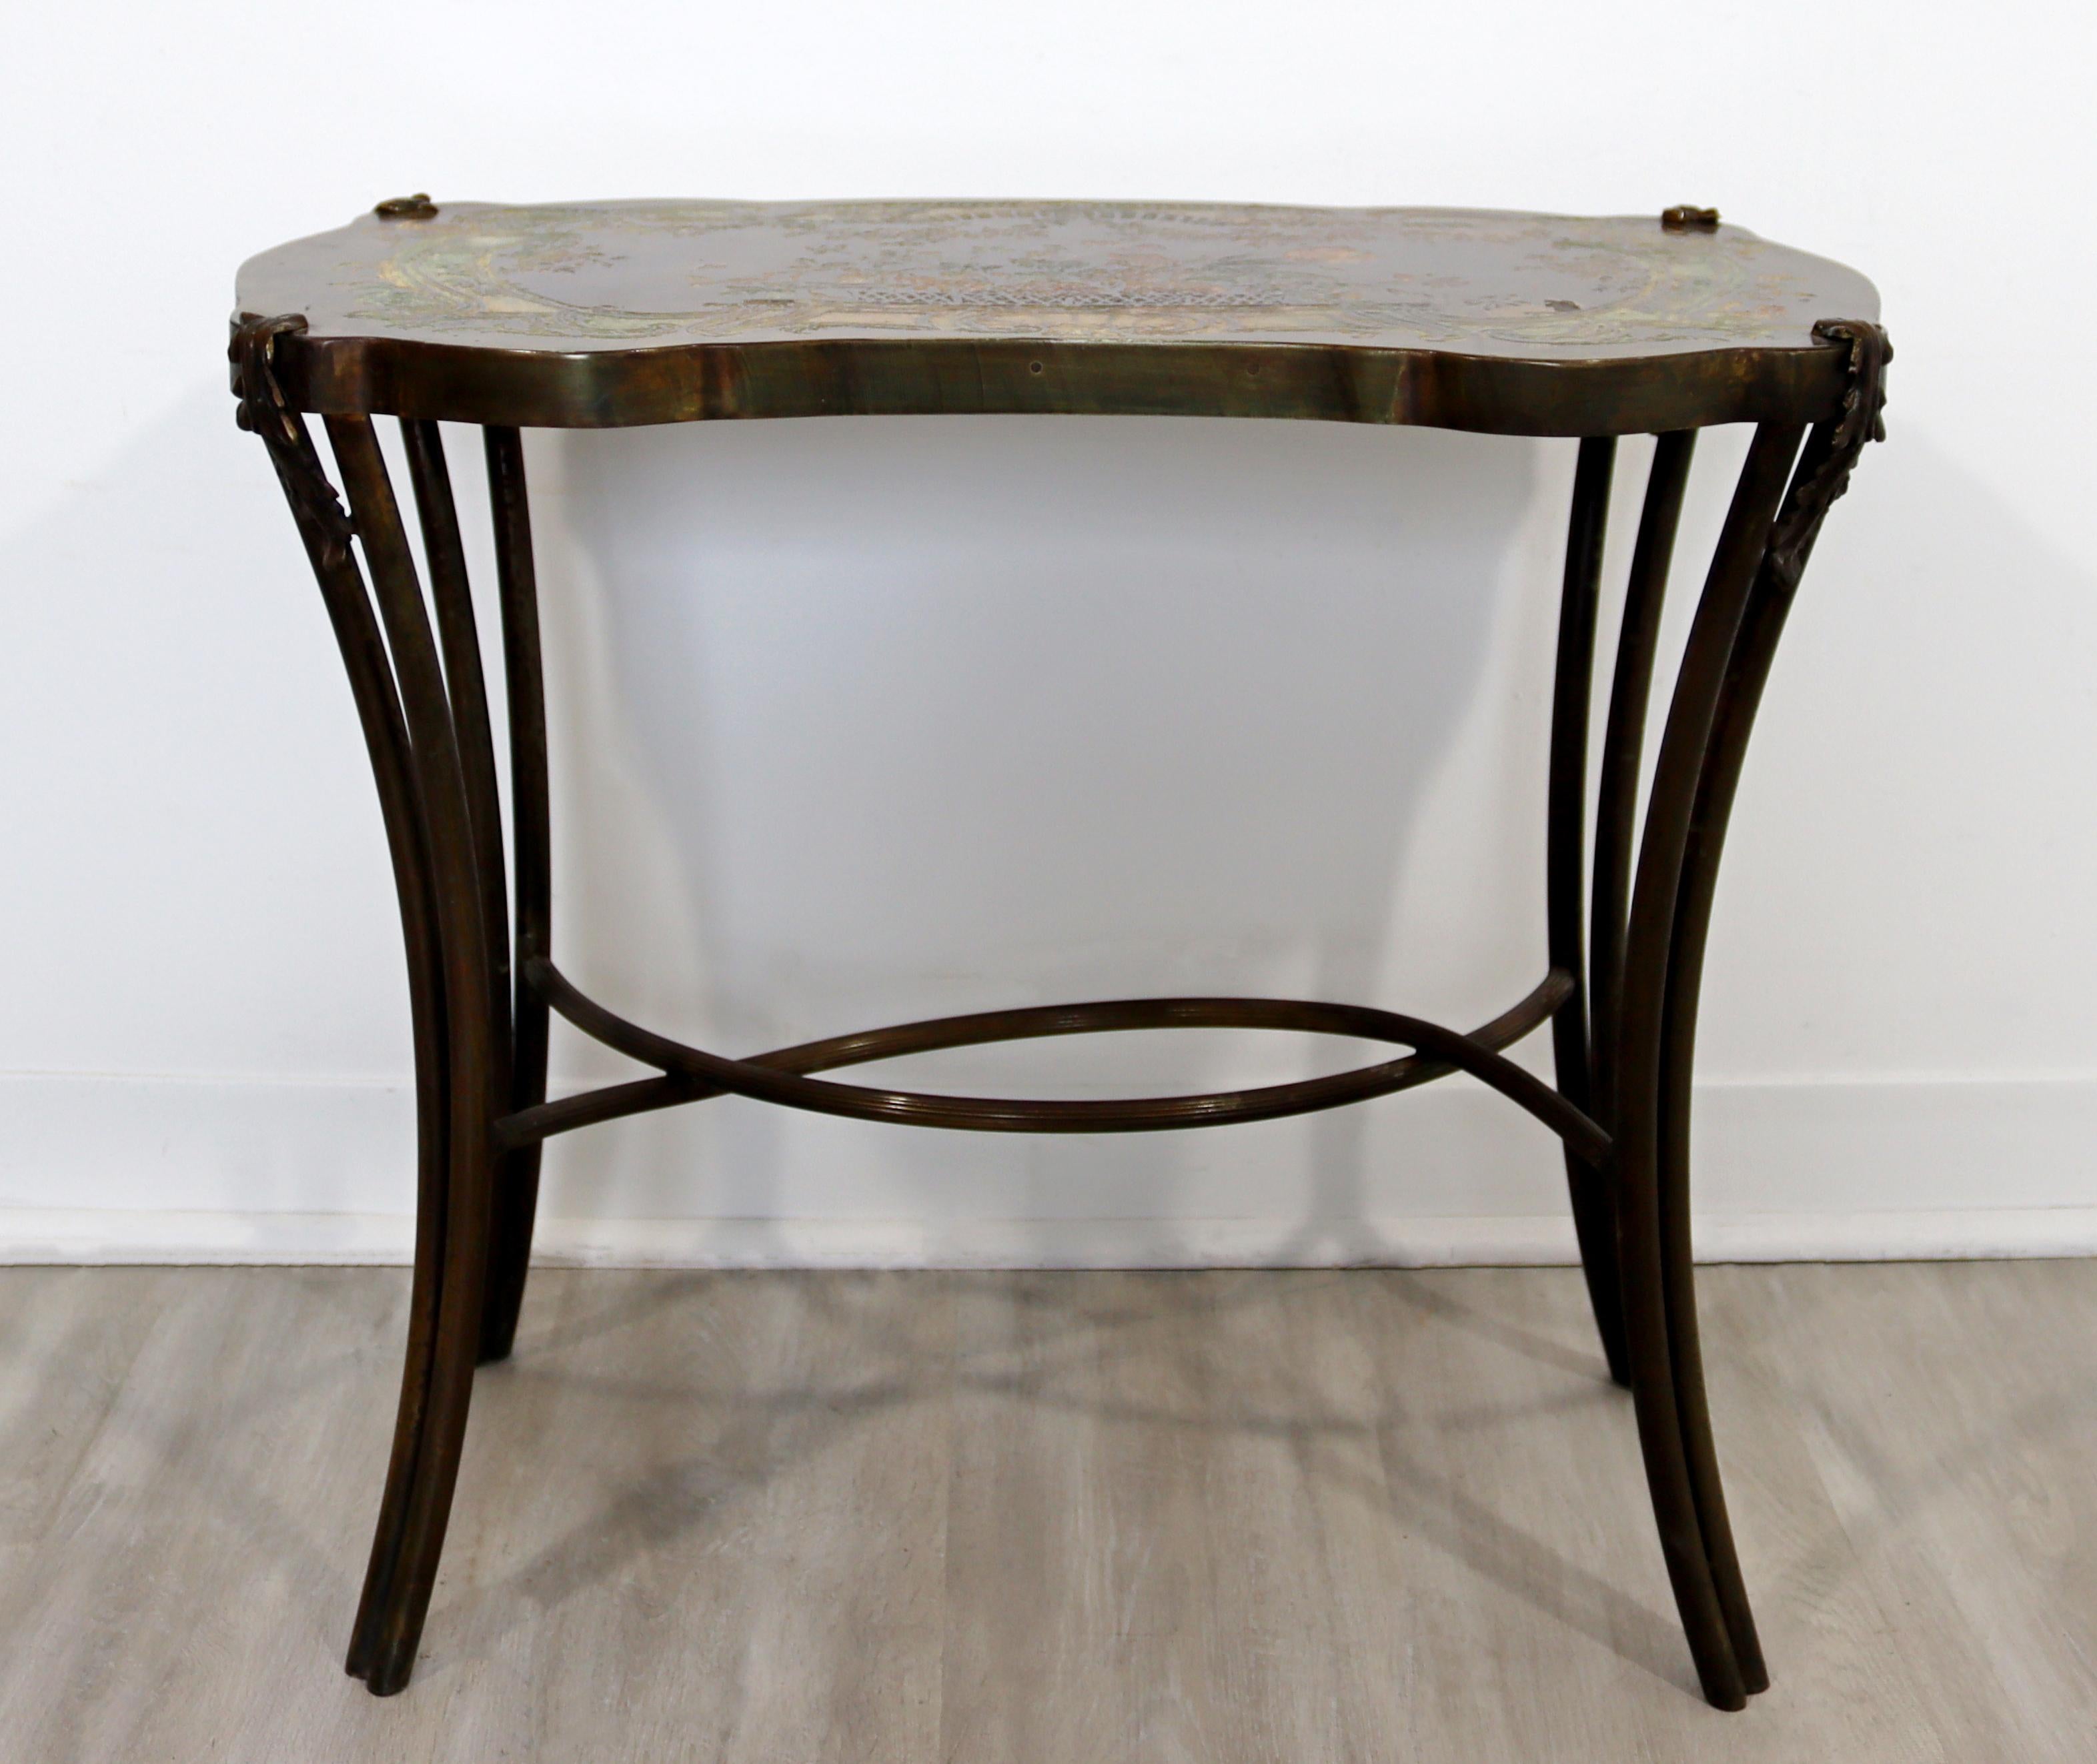 For your consideration is an absolutely incredible, acid etched occasional table, 